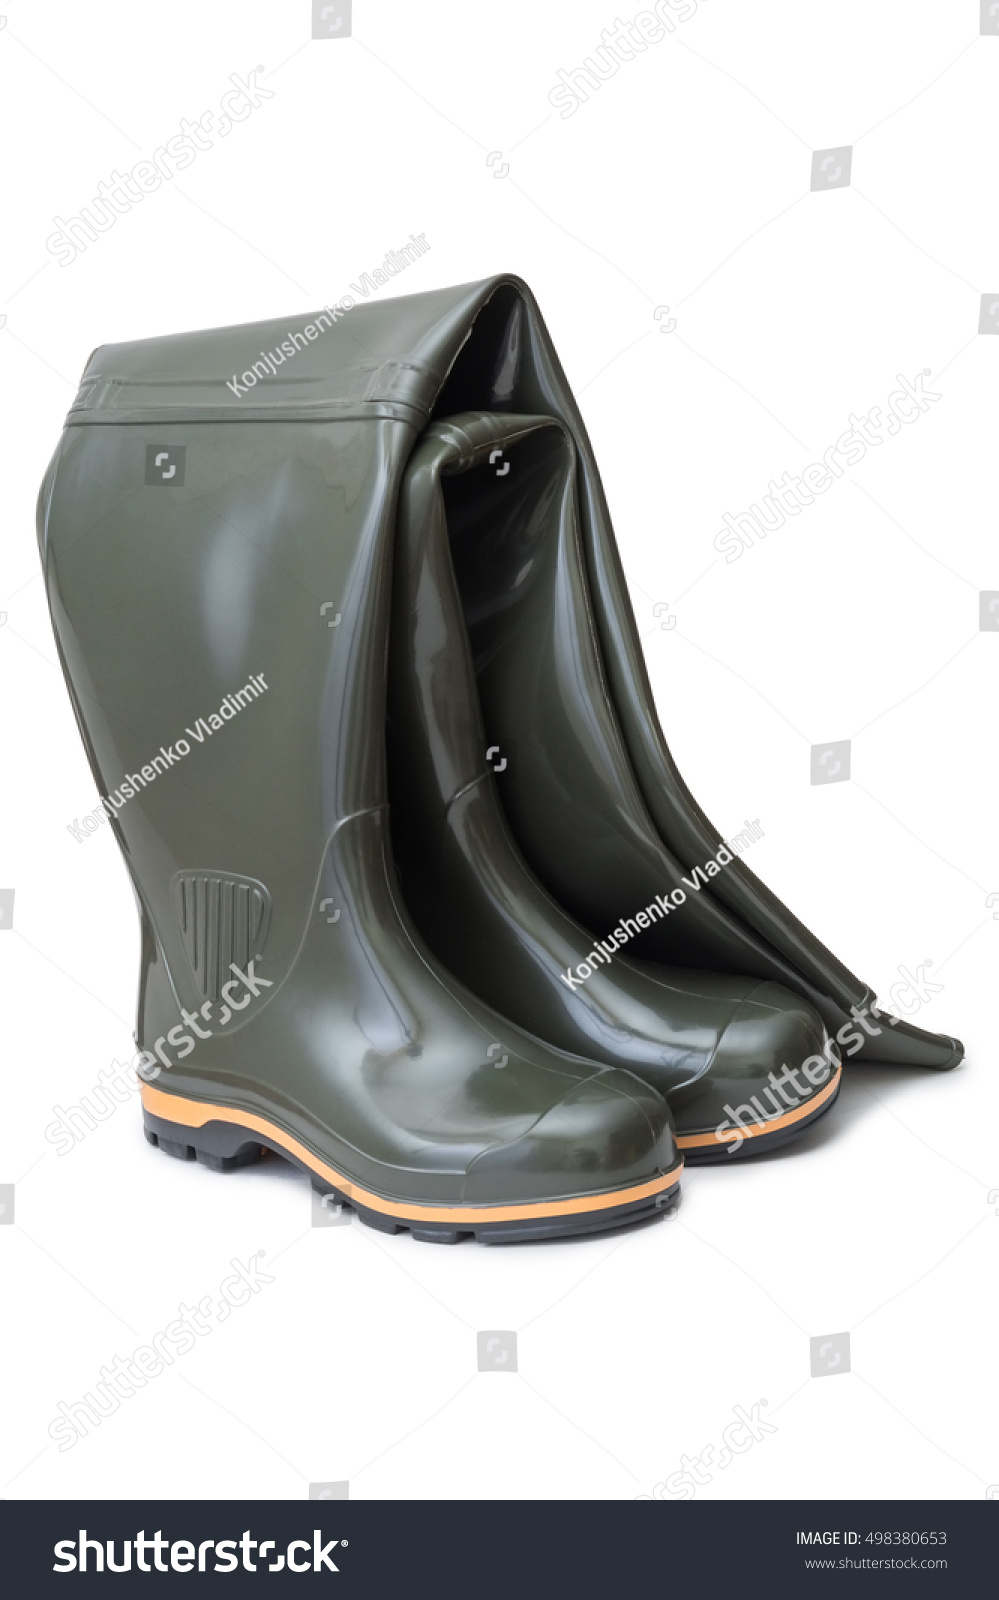 hunting and fishing boots